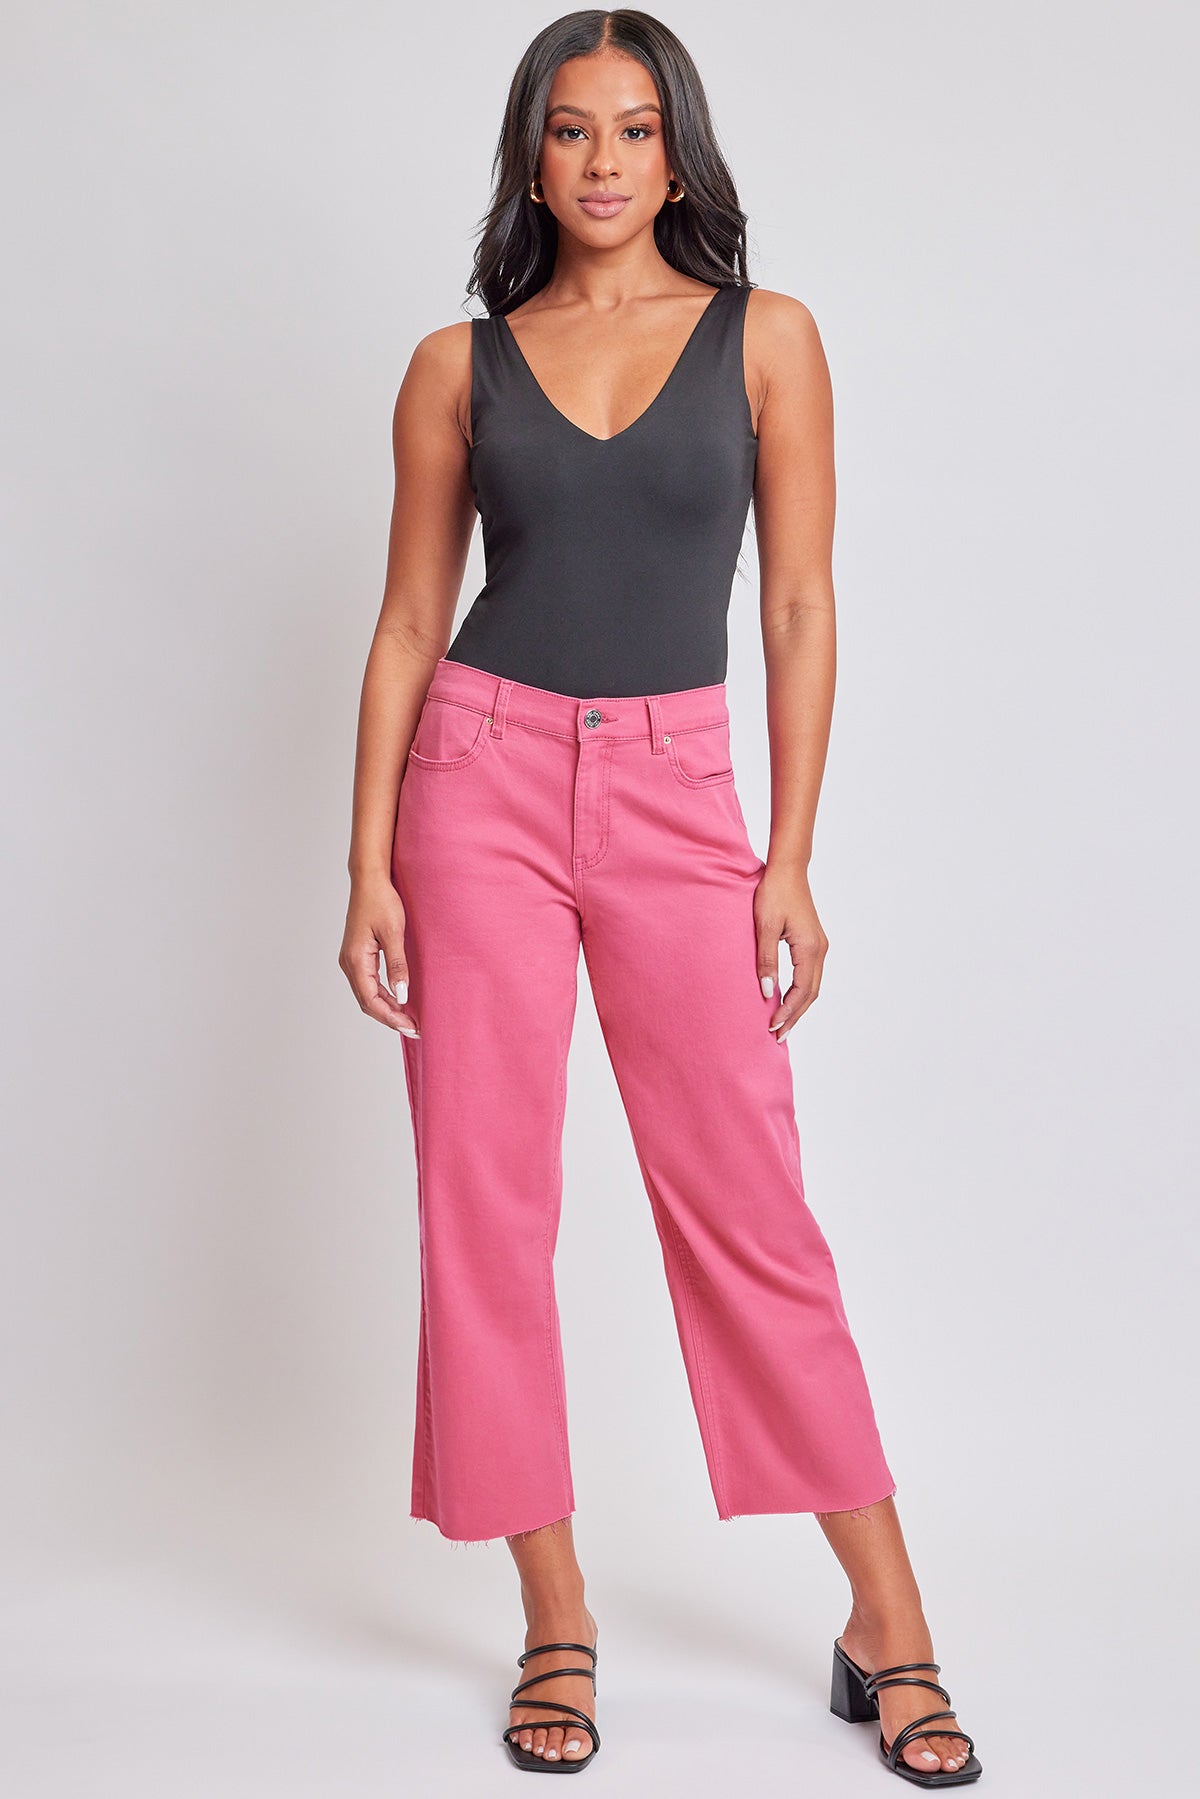 Women's High Rise Cropped Trouser Jeans Wide Leg Fit